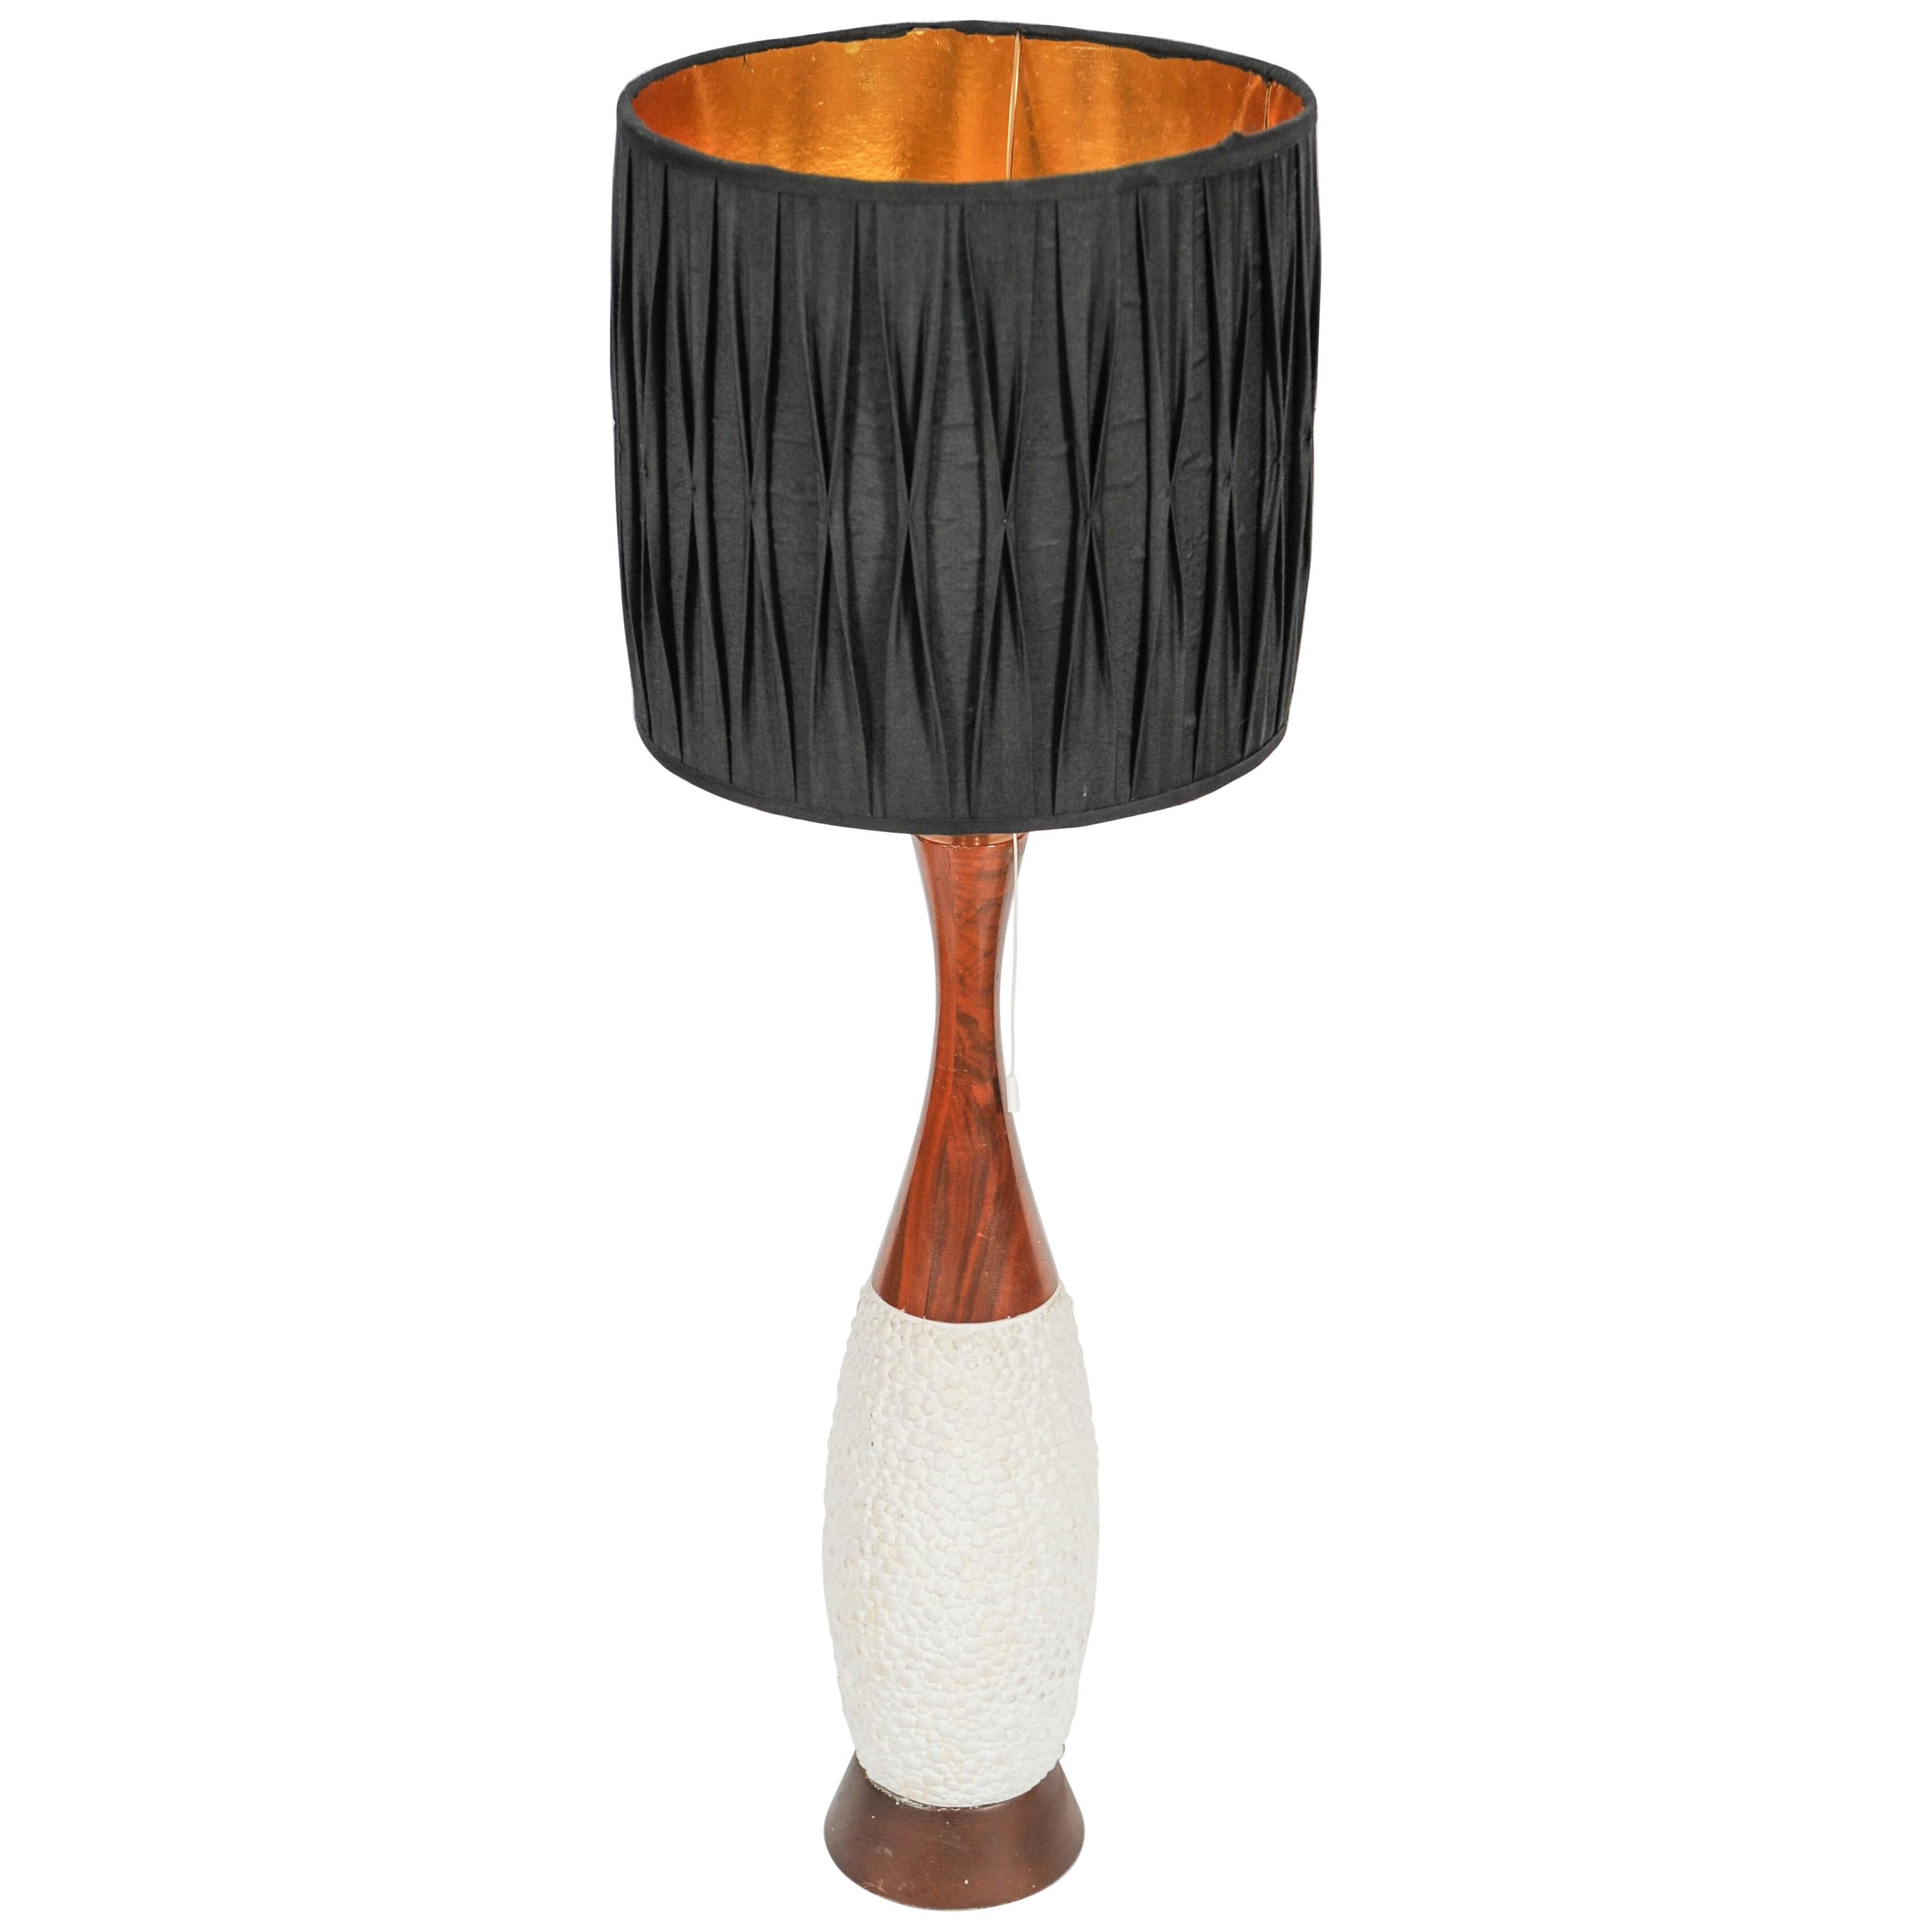 Copper Based Floor/Table Lamp with Ceramic Body Cherrywood Top Golden Lampshade